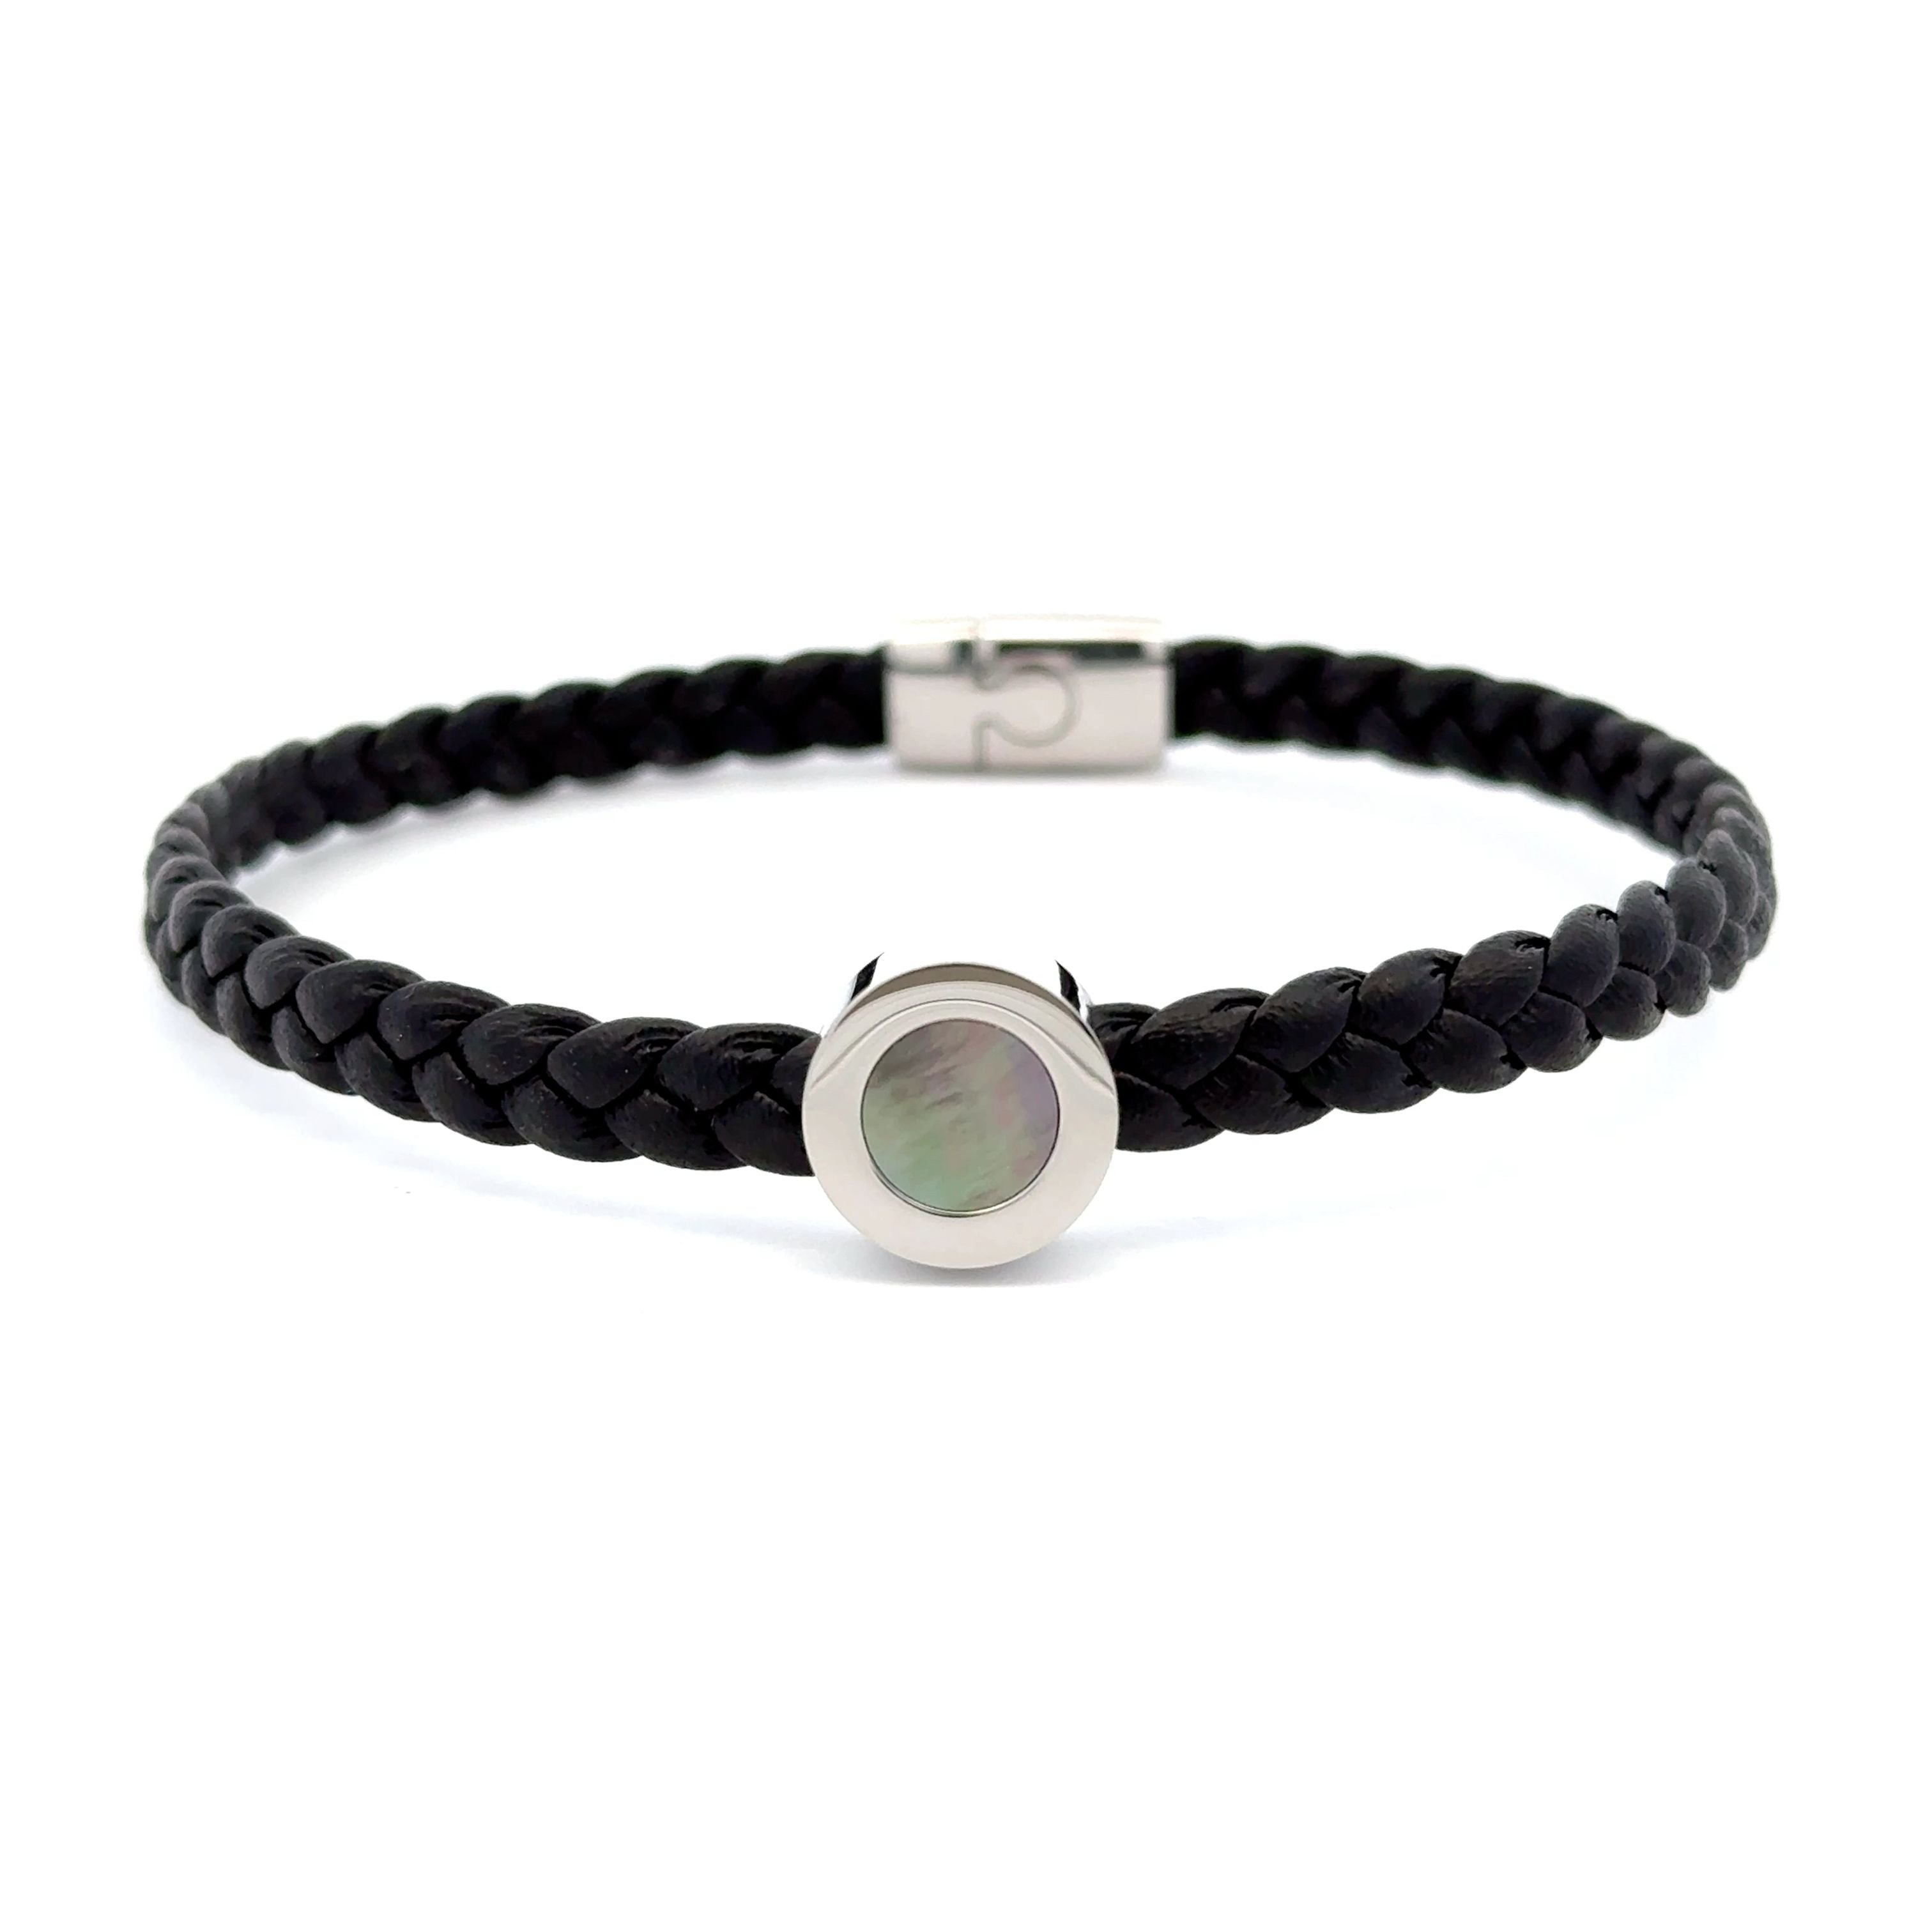 Stainless Steel Braided Black Leather Bracelet with Black Mother of Pearl